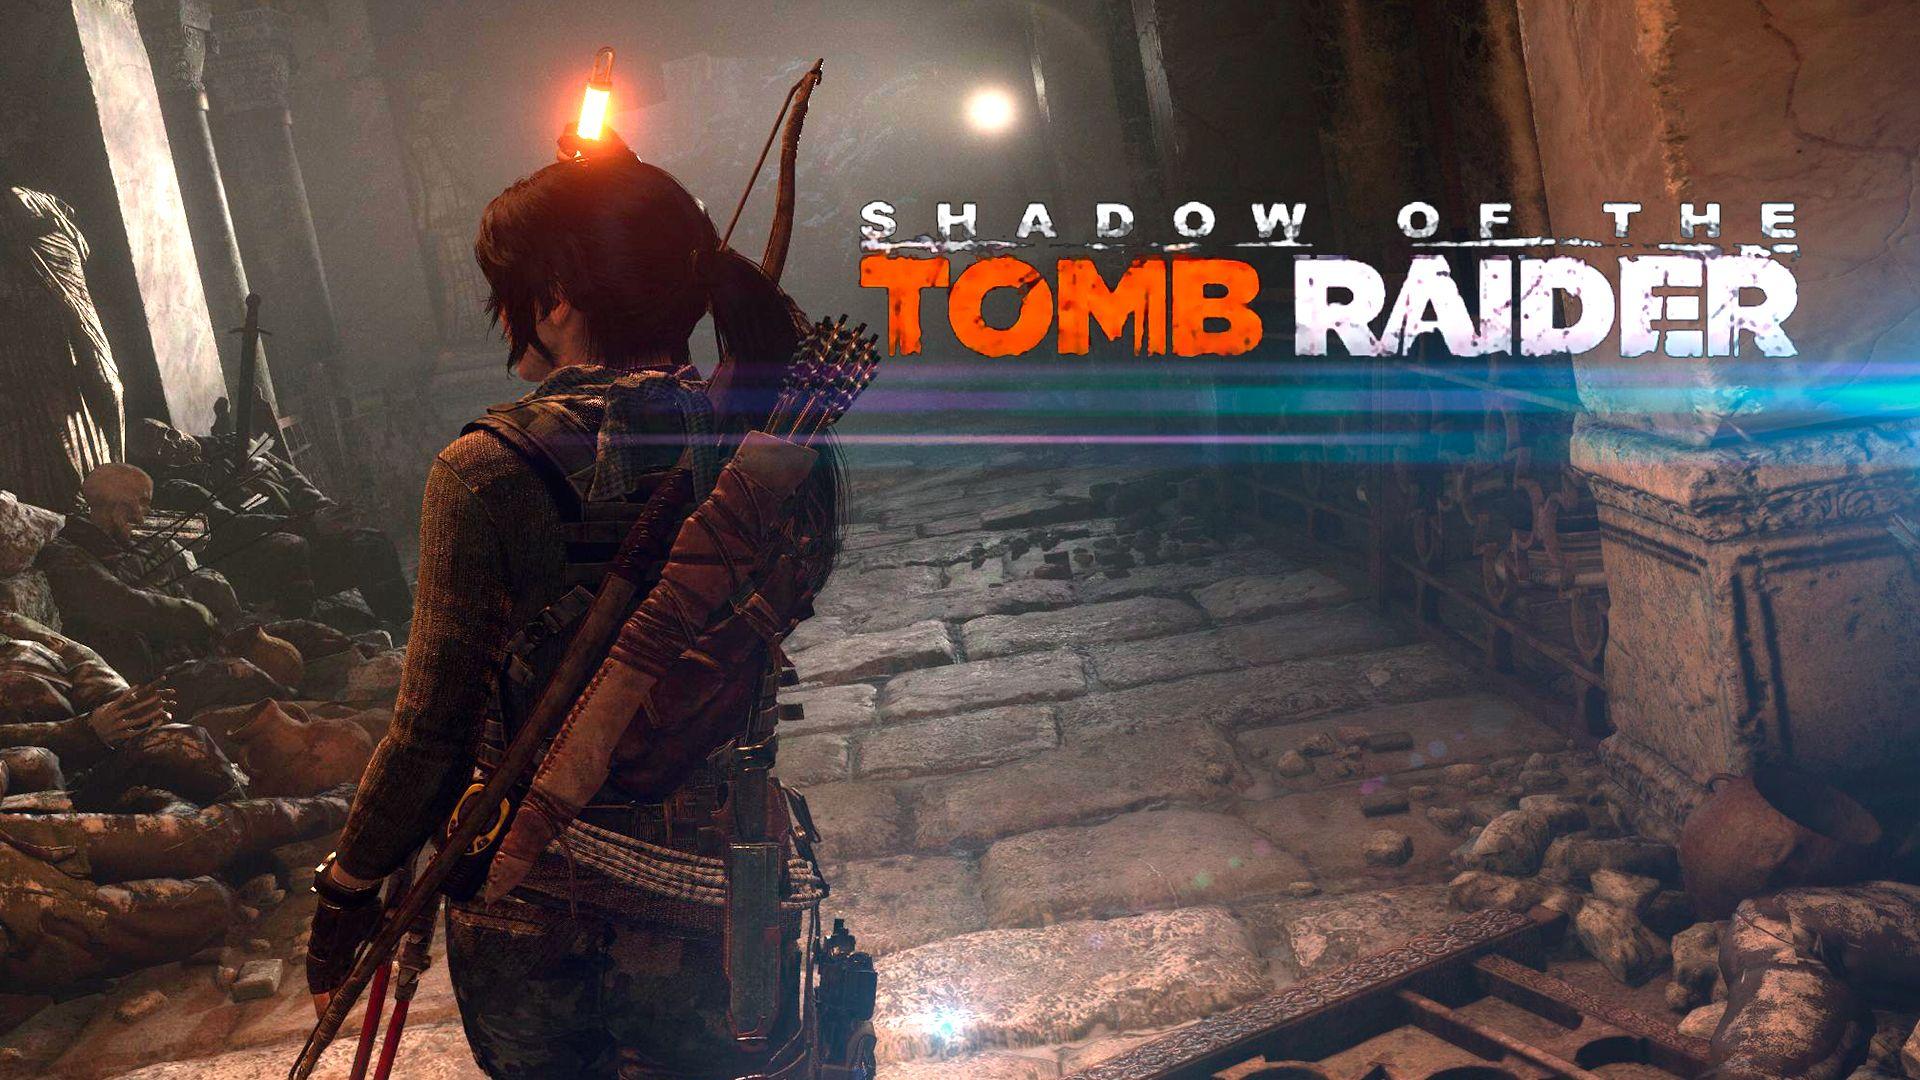 Shadow of the Tomb Raider will be announced on March 15 for PC, PS4